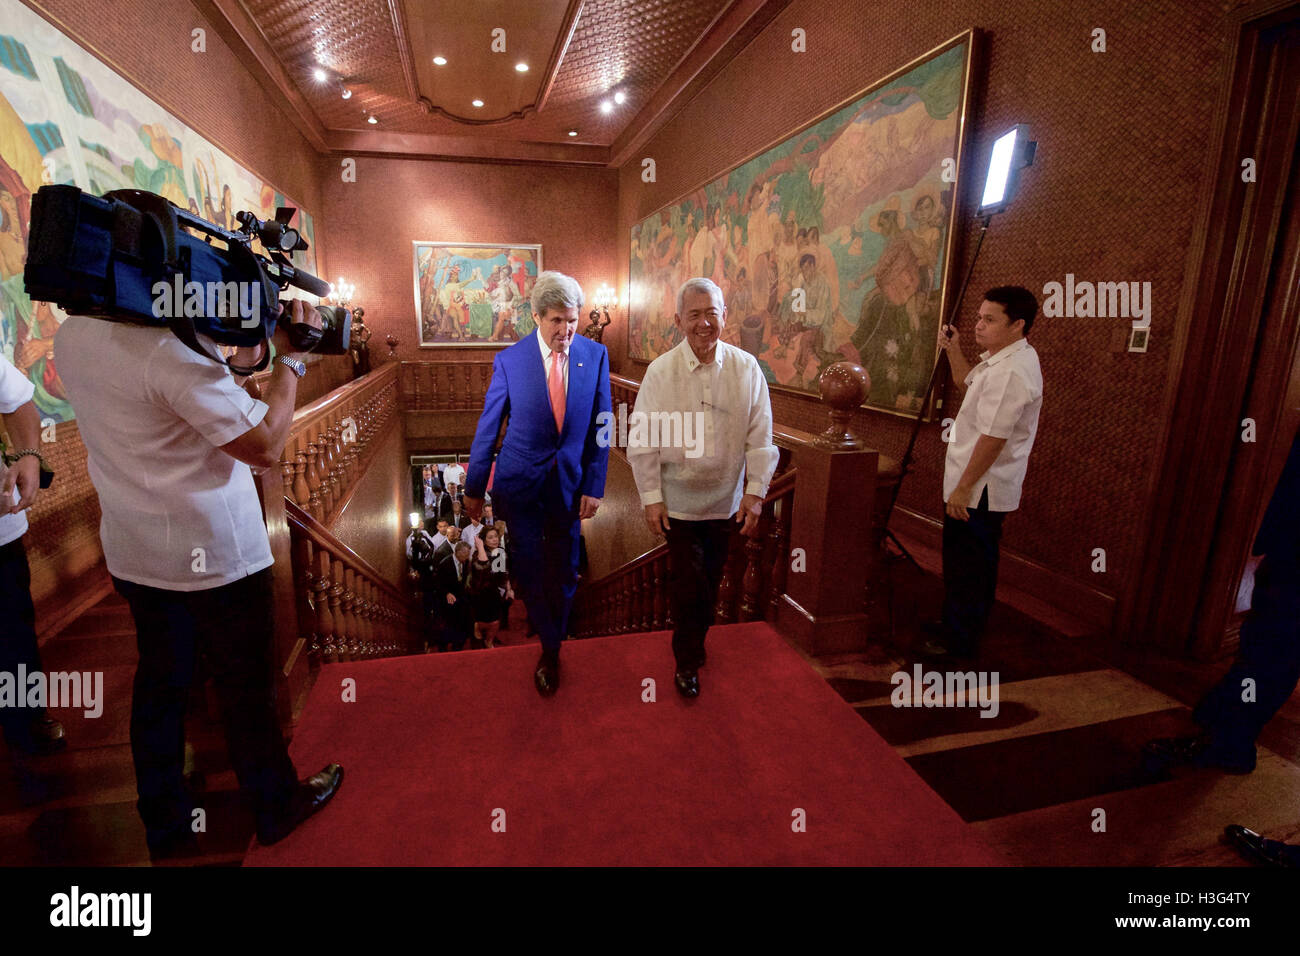 Philippines Foreign Secretary Perfecto Yasay guides U.S. Secretary of State John Kerry as they walk through the Malacañang Palace in Manila, Philippines, on July 27, 2016, before the Secretary held a working lunch with Philippines President Rodrigo Duterte. Stock Photo